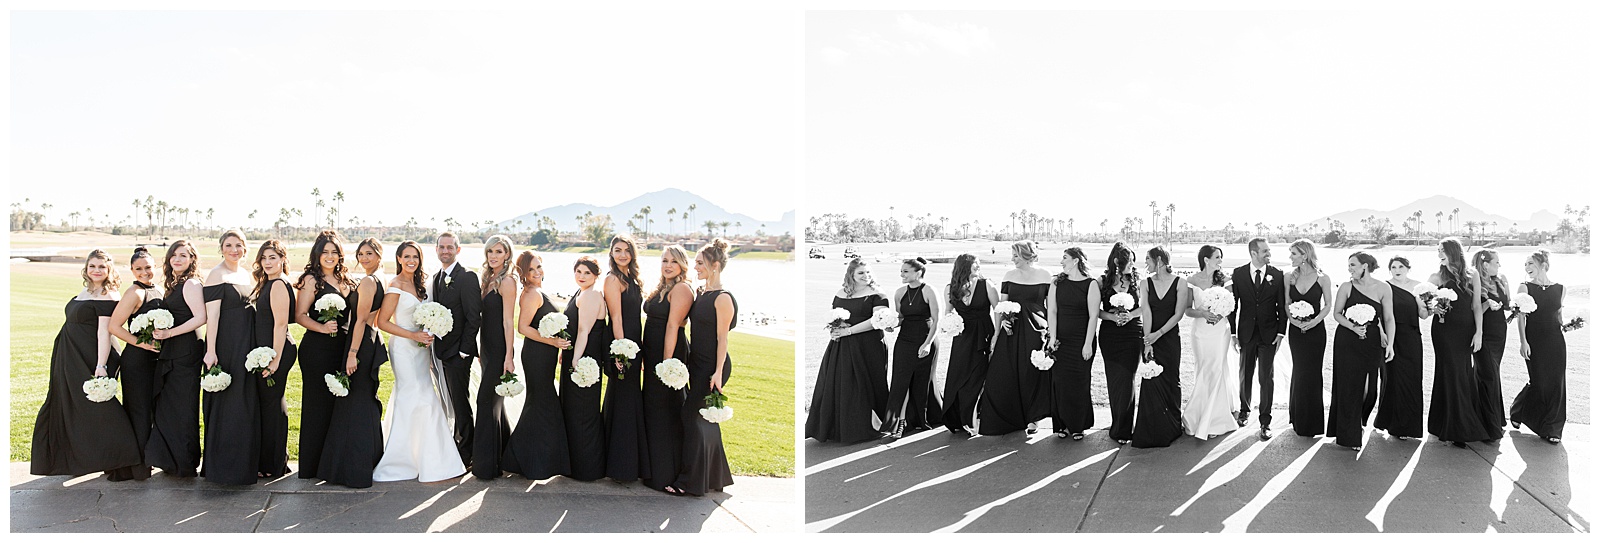 Photograph of all the bridesmaids in their black dresses withe bride in the middle